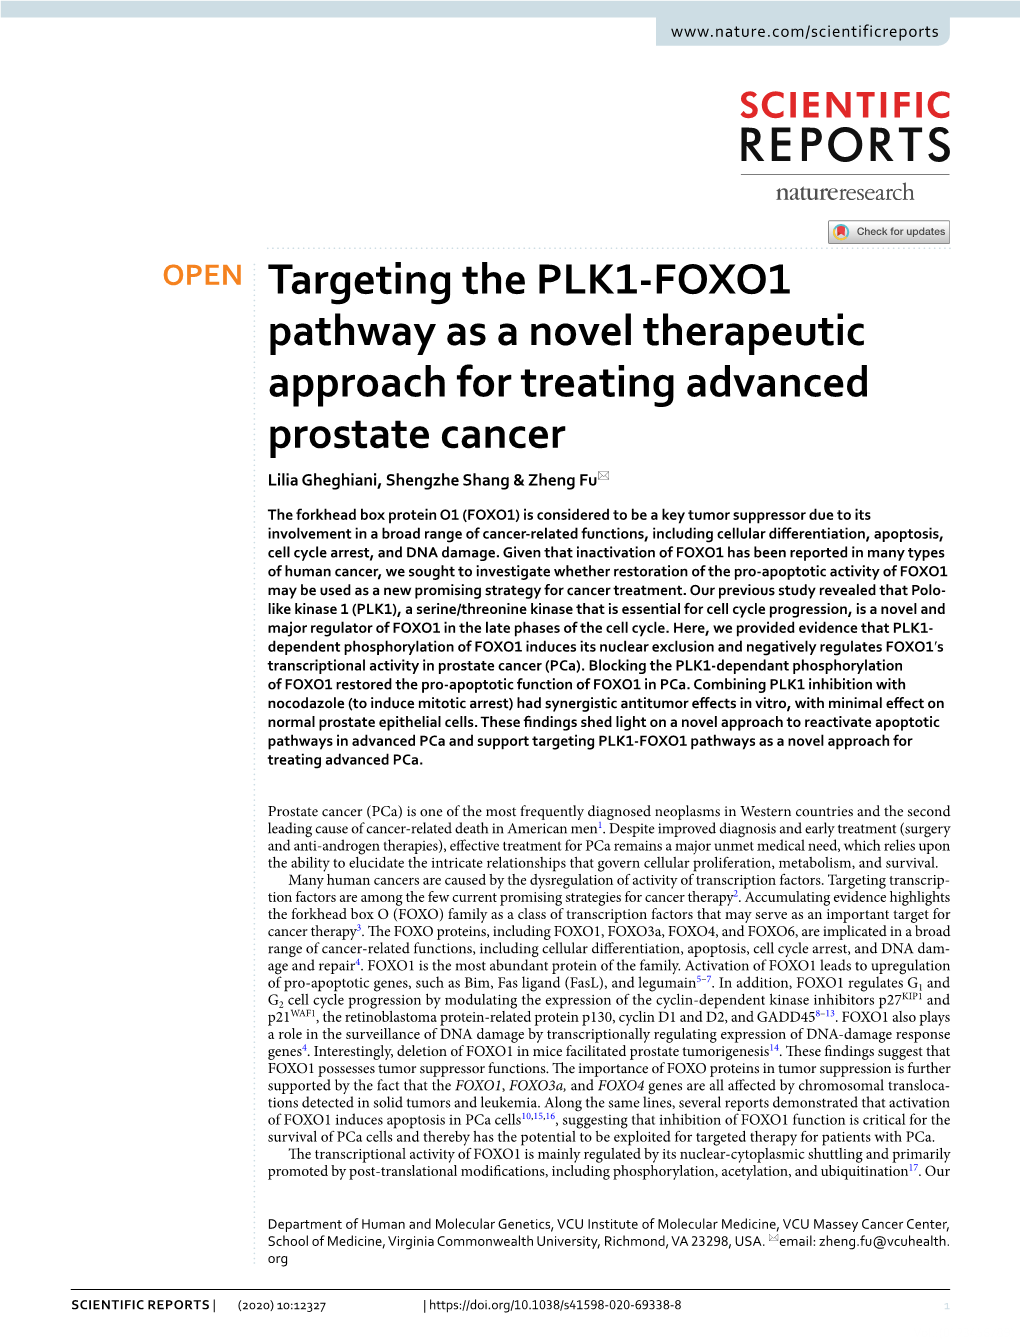 Targeting the PLK1-FOXO1 Pathway As a Novel Therapeutic Approach For